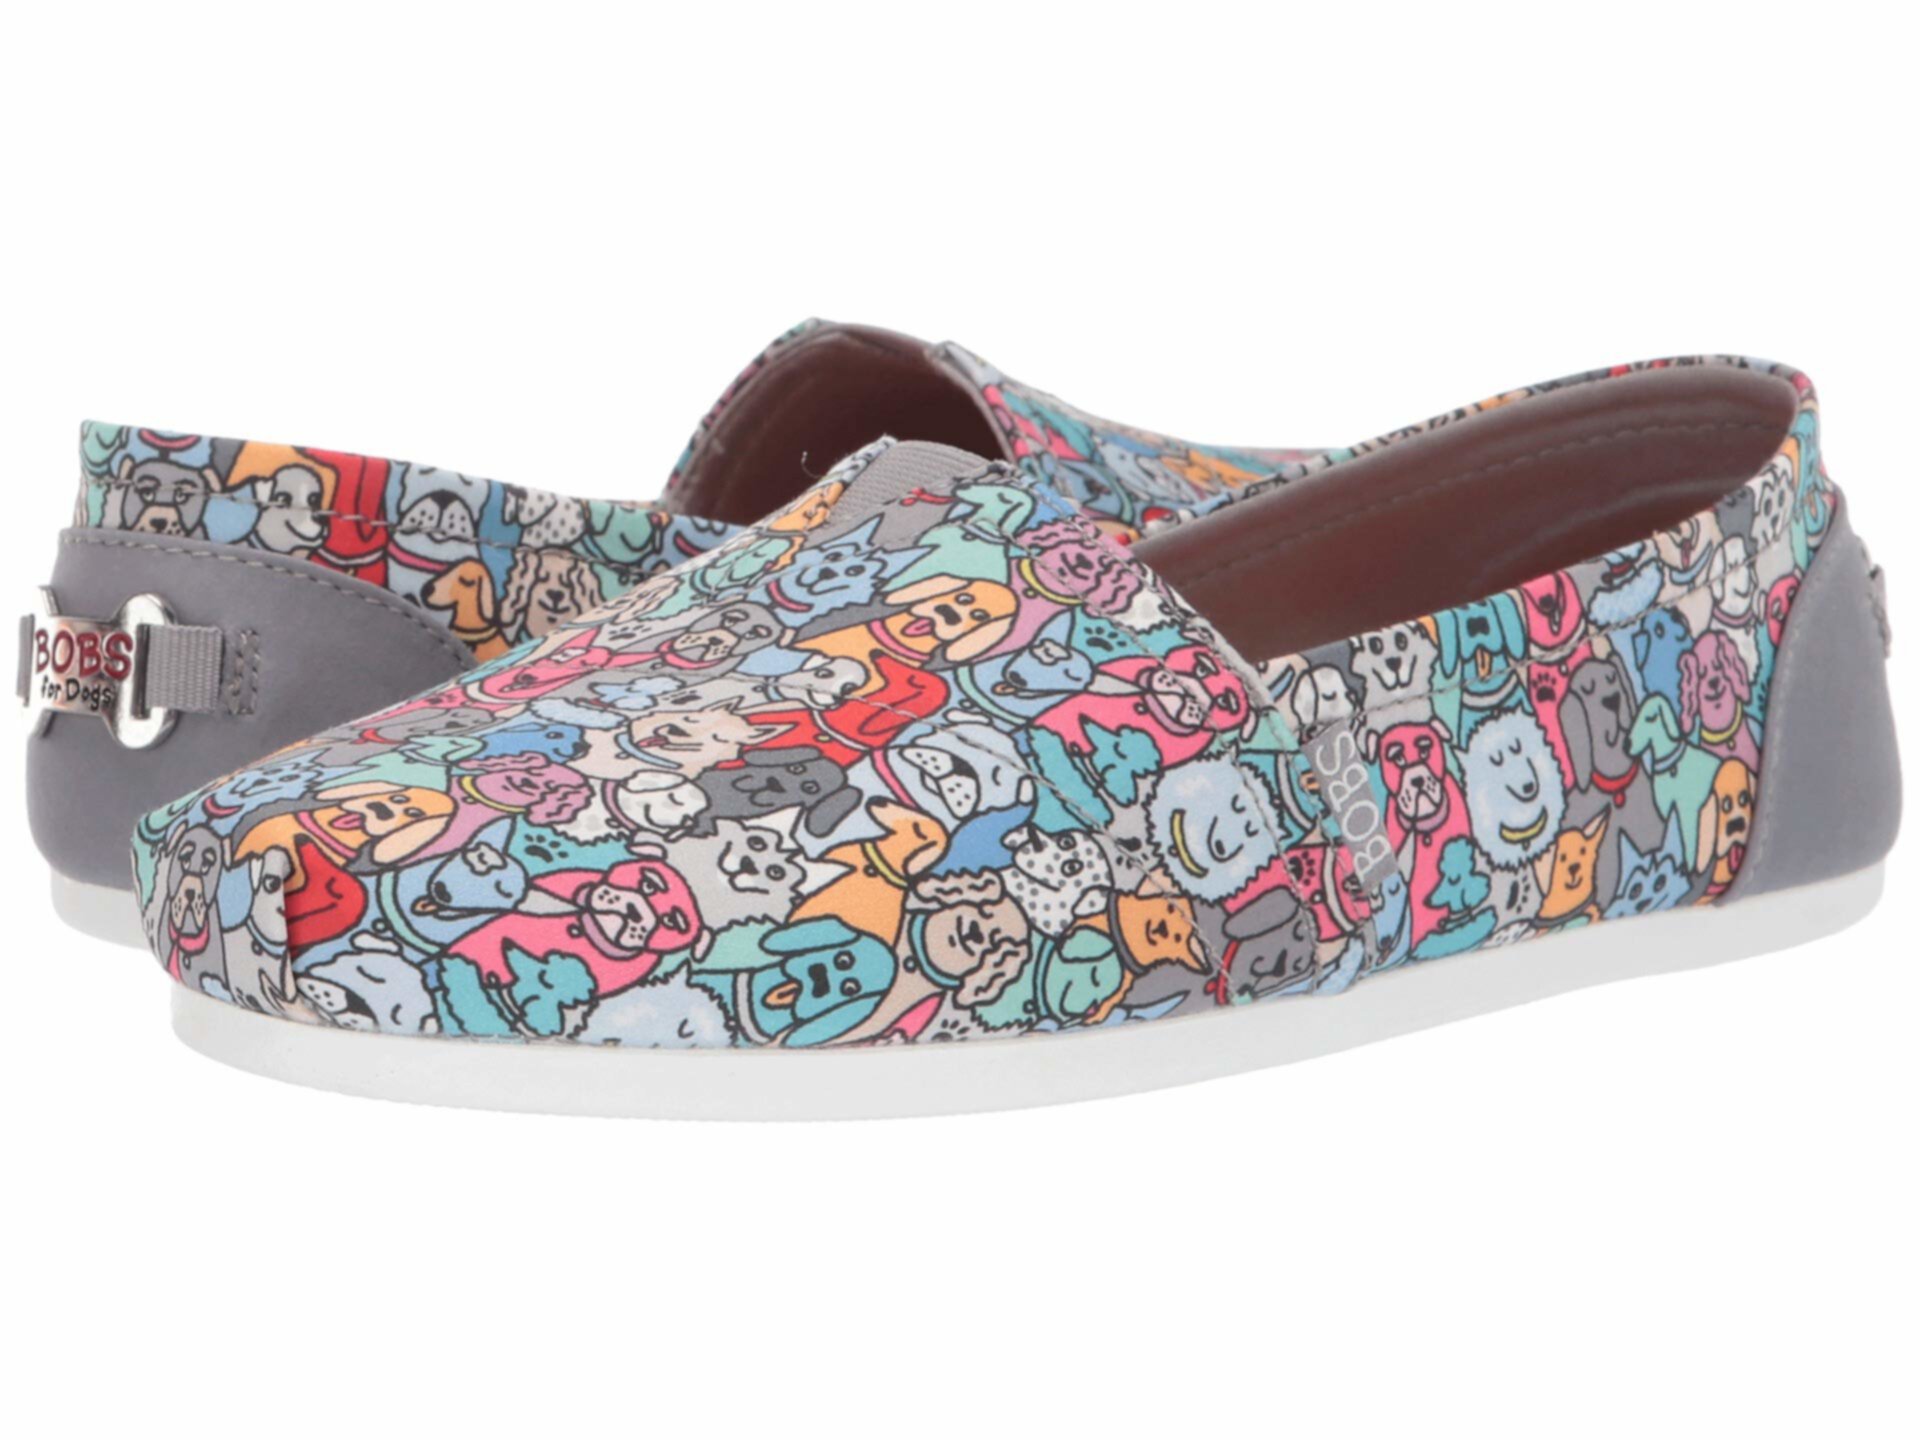 Bobs Plush - Woof Party BOBS from SKECHERS